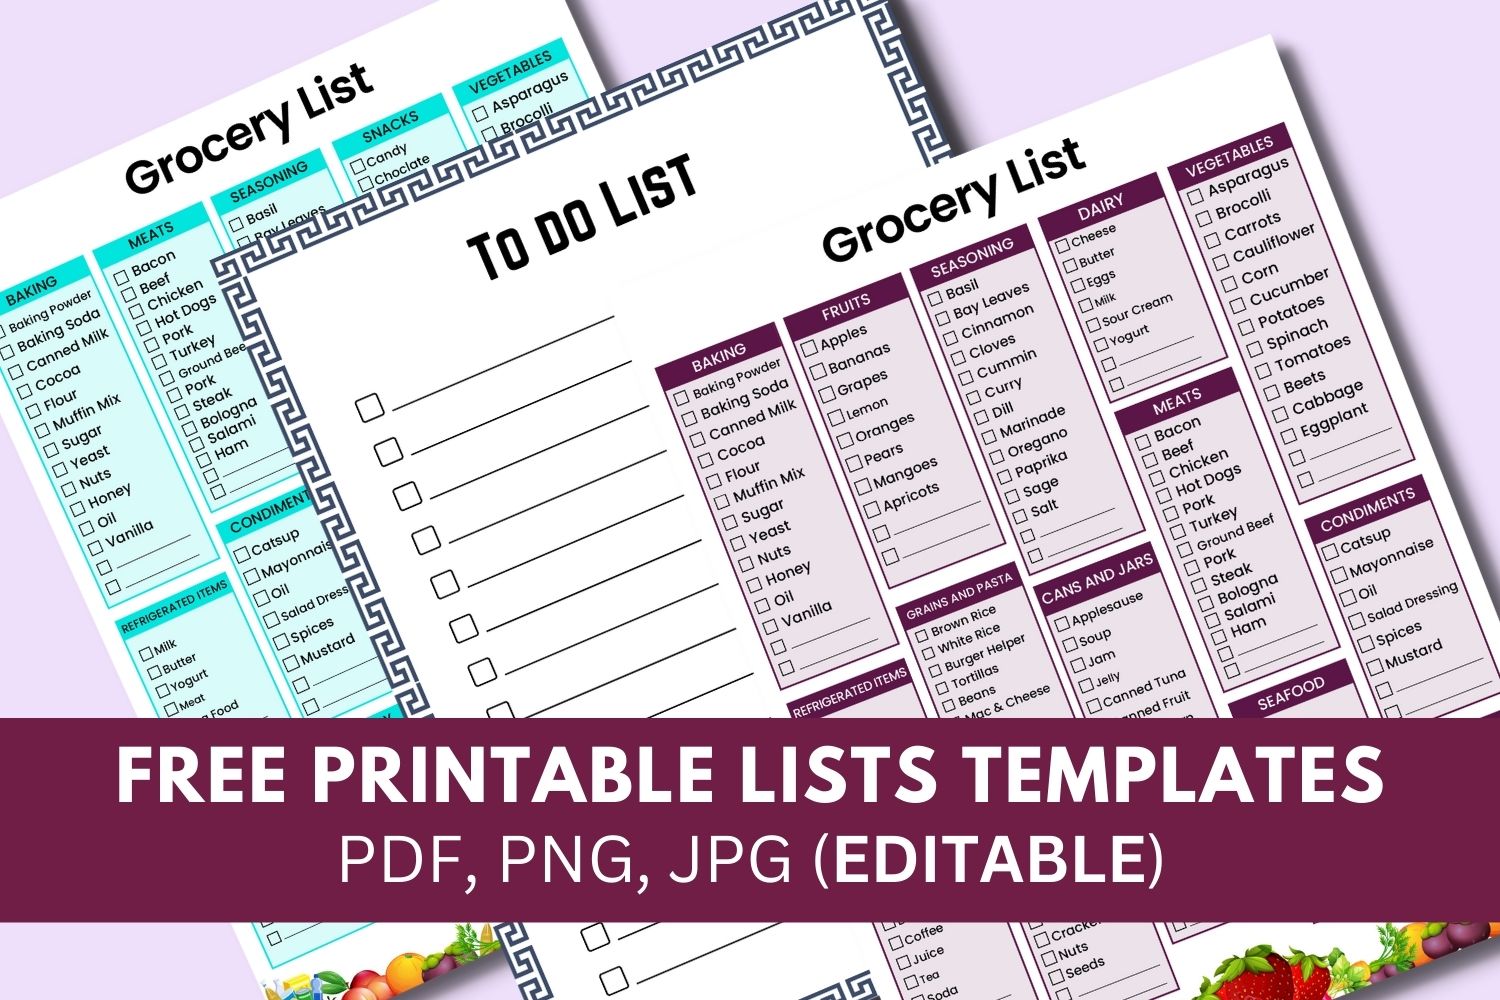 Free printable to do list templates, grocery list templates, shopping list, pdf download, editable